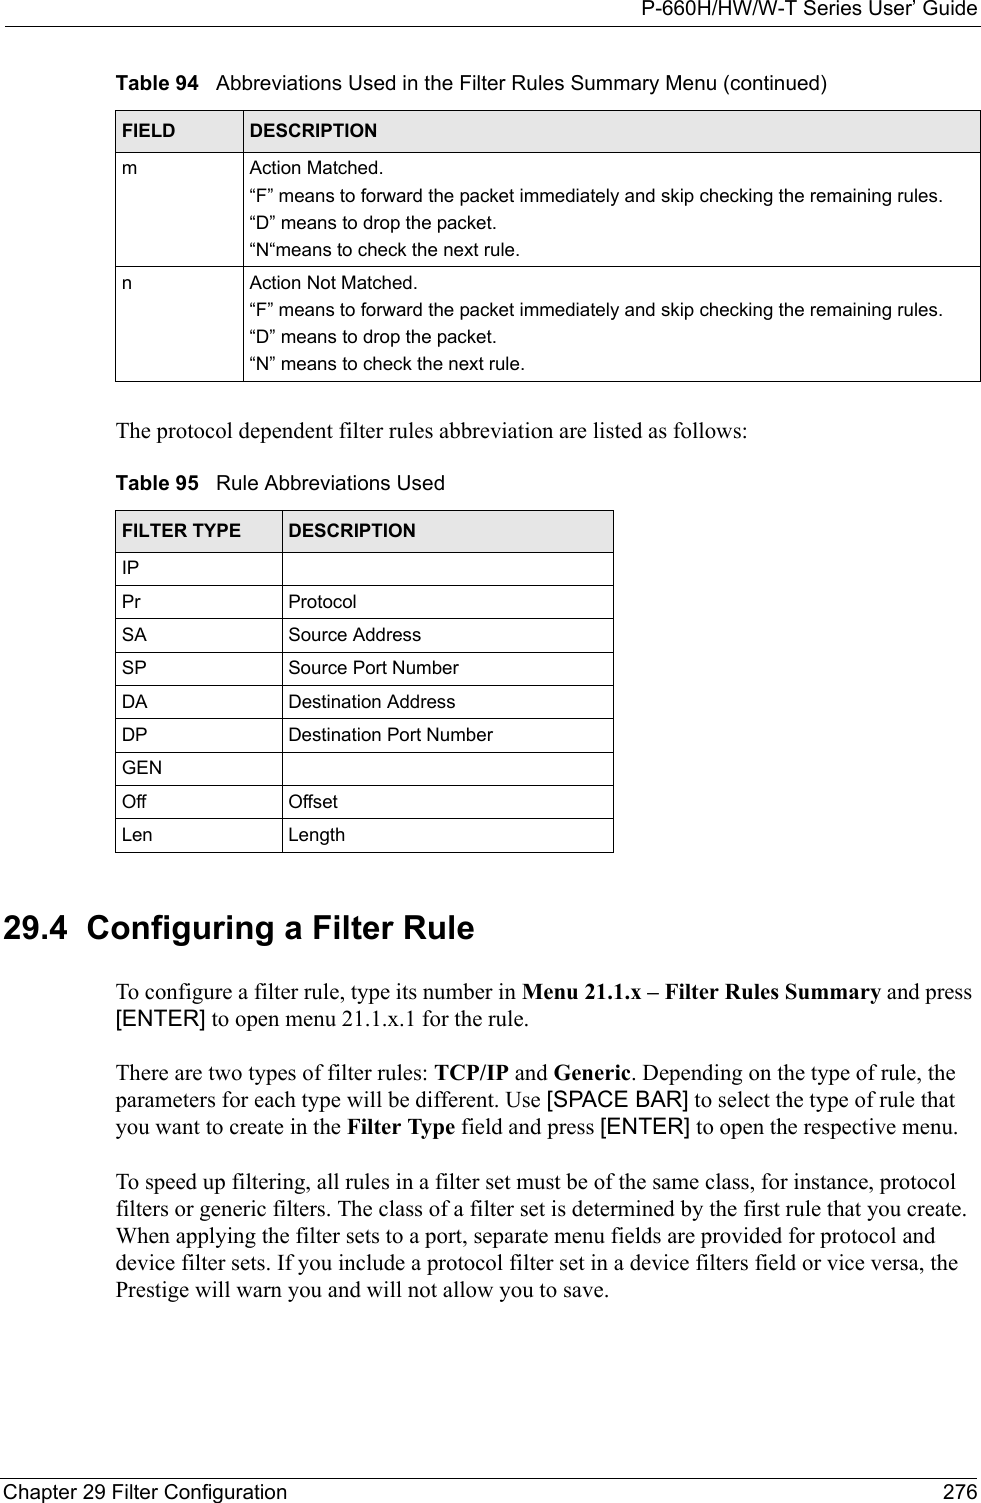 P-660H/HW/W-T Series User’ GuideChapter 29 Filter Configuration 276The protocol dependent filter rules abbreviation are listed as follows:29.4  Configuring a Filter RuleTo configure a filter rule, type its number in Menu 21.1.x – Filter Rules Summary and press [ENTER] to open menu 21.1.x.1 for the rule.There are two types of filter rules: TCP/IP and Generic. Depending on the type of rule, the parameters for each type will be different. Use [SPACE BAR] to select the type of rule that you want to create in the Filter Type field and press [ENTER] to open the respective menu.To speed up filtering, all rules in a filter set must be of the same class, for instance, protocol filters or generic filters. The class of a filter set is determined by the first rule that you create. When applying the filter sets to a port, separate menu fields are provided for protocol and device filter sets. If you include a protocol filter set in a device filters field or vice versa, the Prestige will warn you and will not allow you to save.mAction Matched.“F” means to forward the packet immediately and skip checking the remaining rules.“D” means to drop the packet.“N“means to check the next rule.nAction Not Matched.“F” means to forward the packet immediately and skip checking the remaining rules.“D” means to drop the packet.“N” means to check the next rule.Table 95   Rule Abbreviations UsedFILTER TYPE DESCRIPTIONIPPr ProtocolSA Source AddressSP Source Port NumberDA Destination AddressDP Destination Port NumberGENOff OffsetLen LengthTable 94   Abbreviations Used in the Filter Rules Summary Menu (continued)FIELD DESCRIPTION